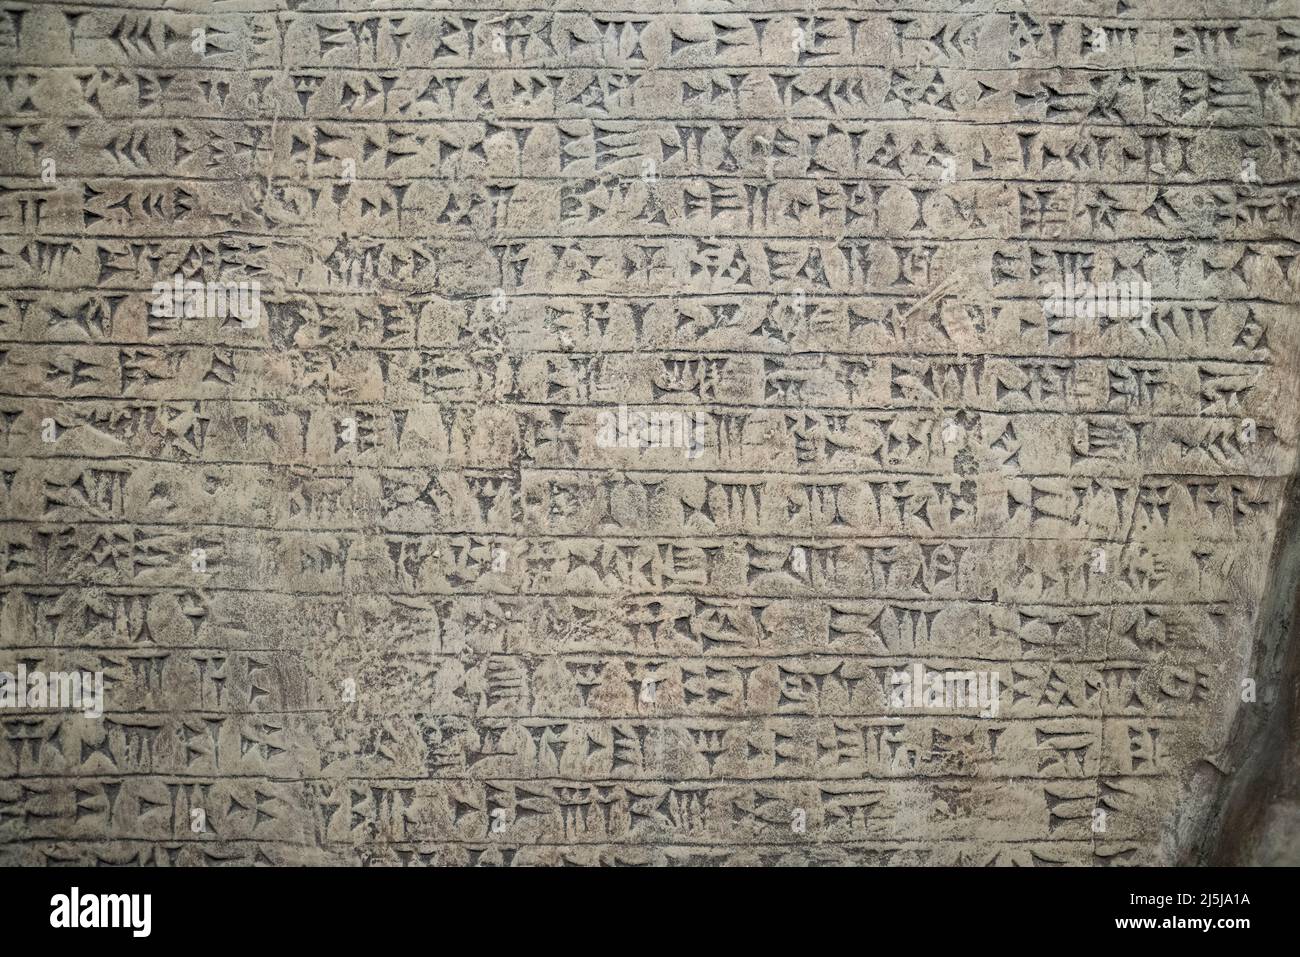 Ancient cuneiform writing script on the wall. High quality photo Stock Photo